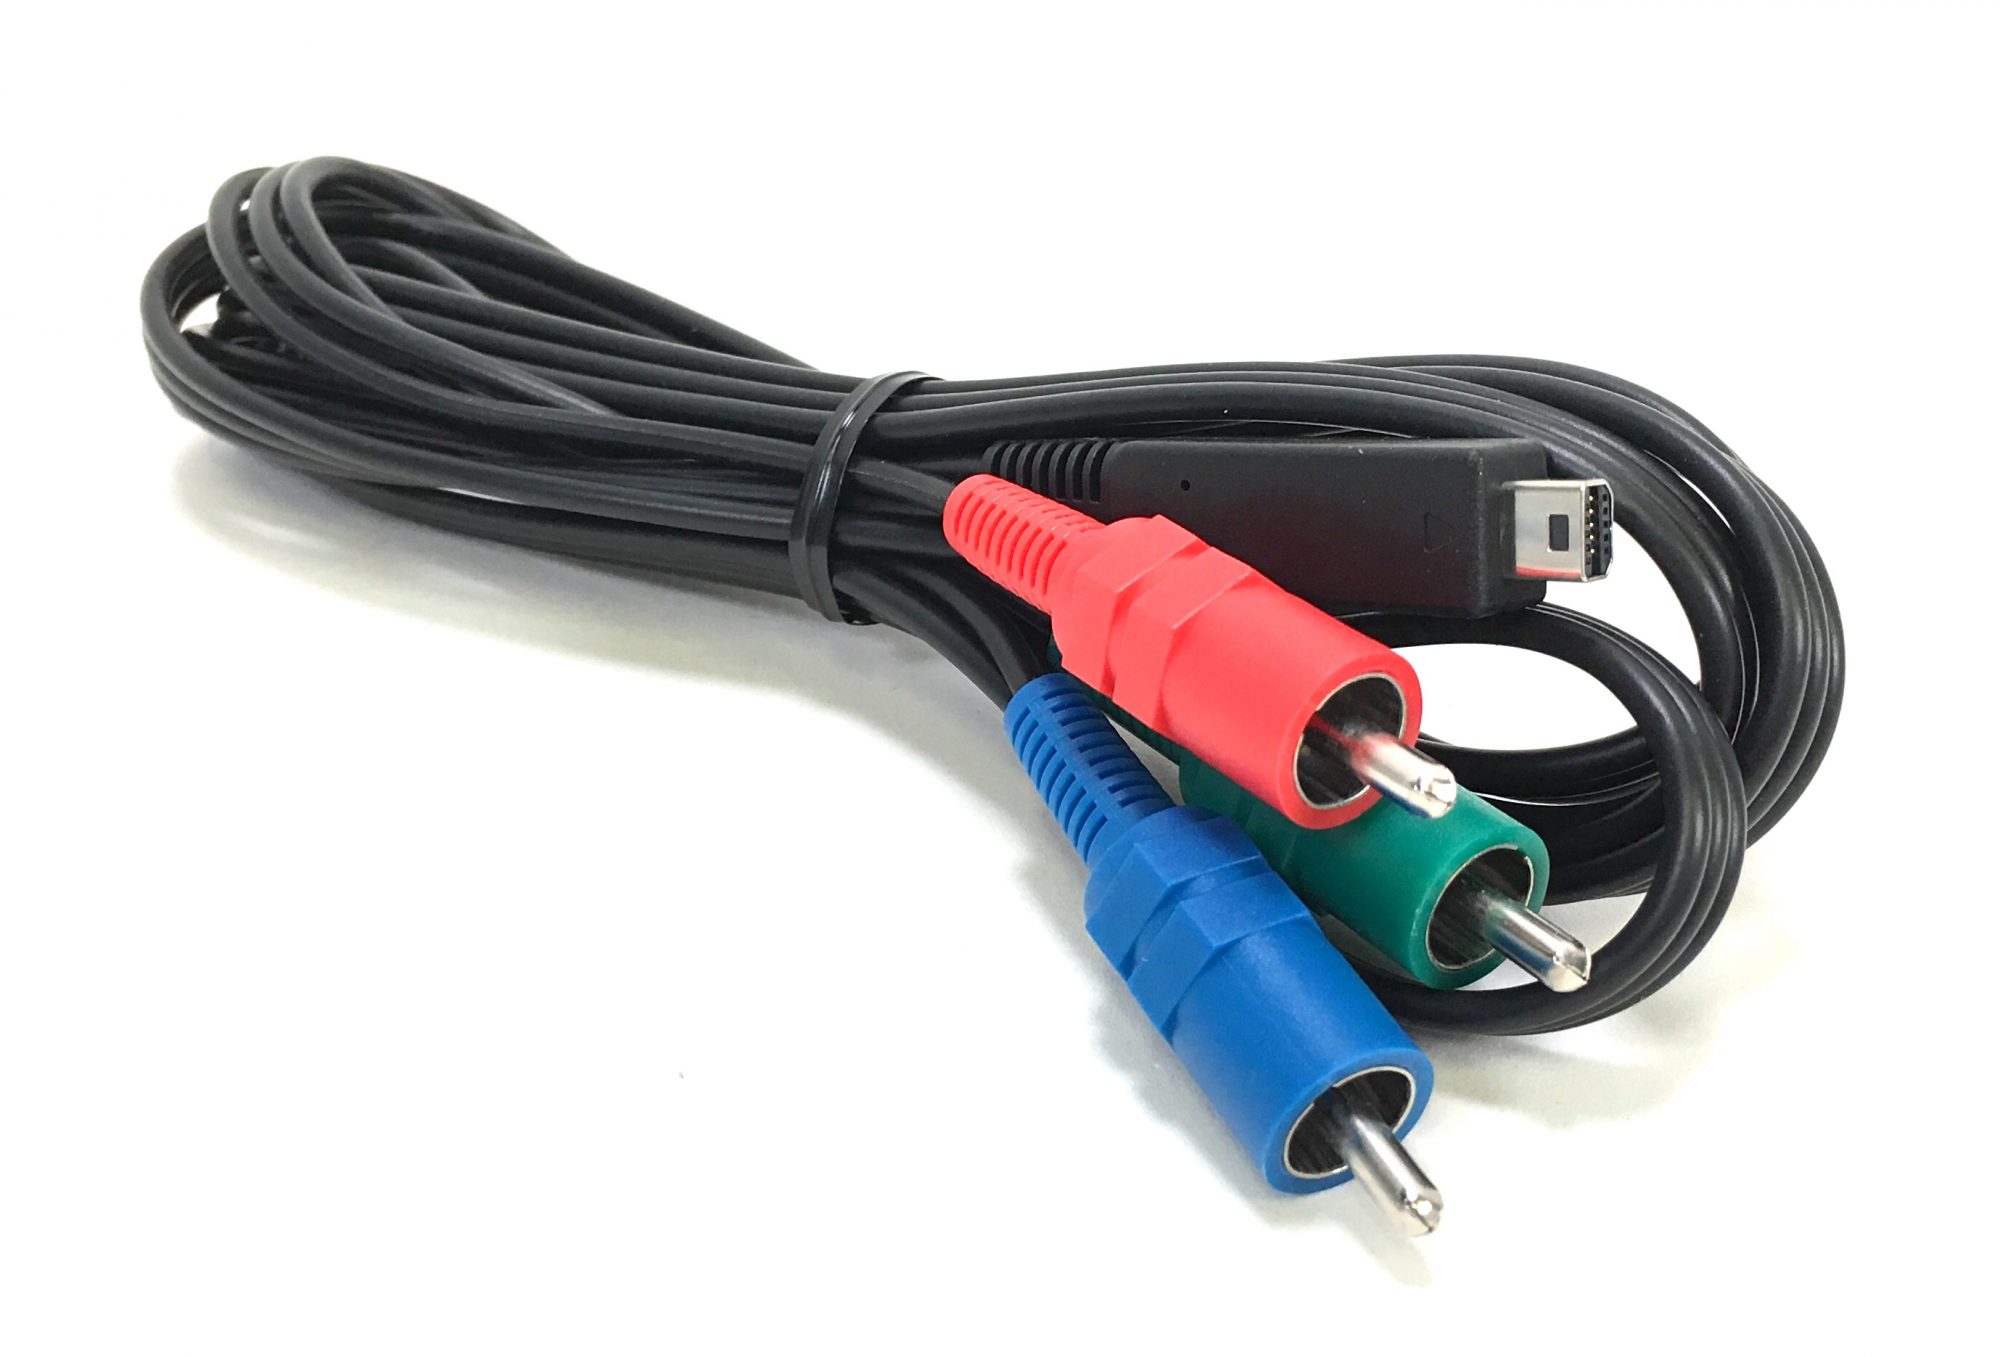 Original Component Video Cable that came with the Sony NEX-FS100 camcorder. It is a genuine Sony part, sourced directly from Sony USA. Brand new factory fresh. Free Shipping.